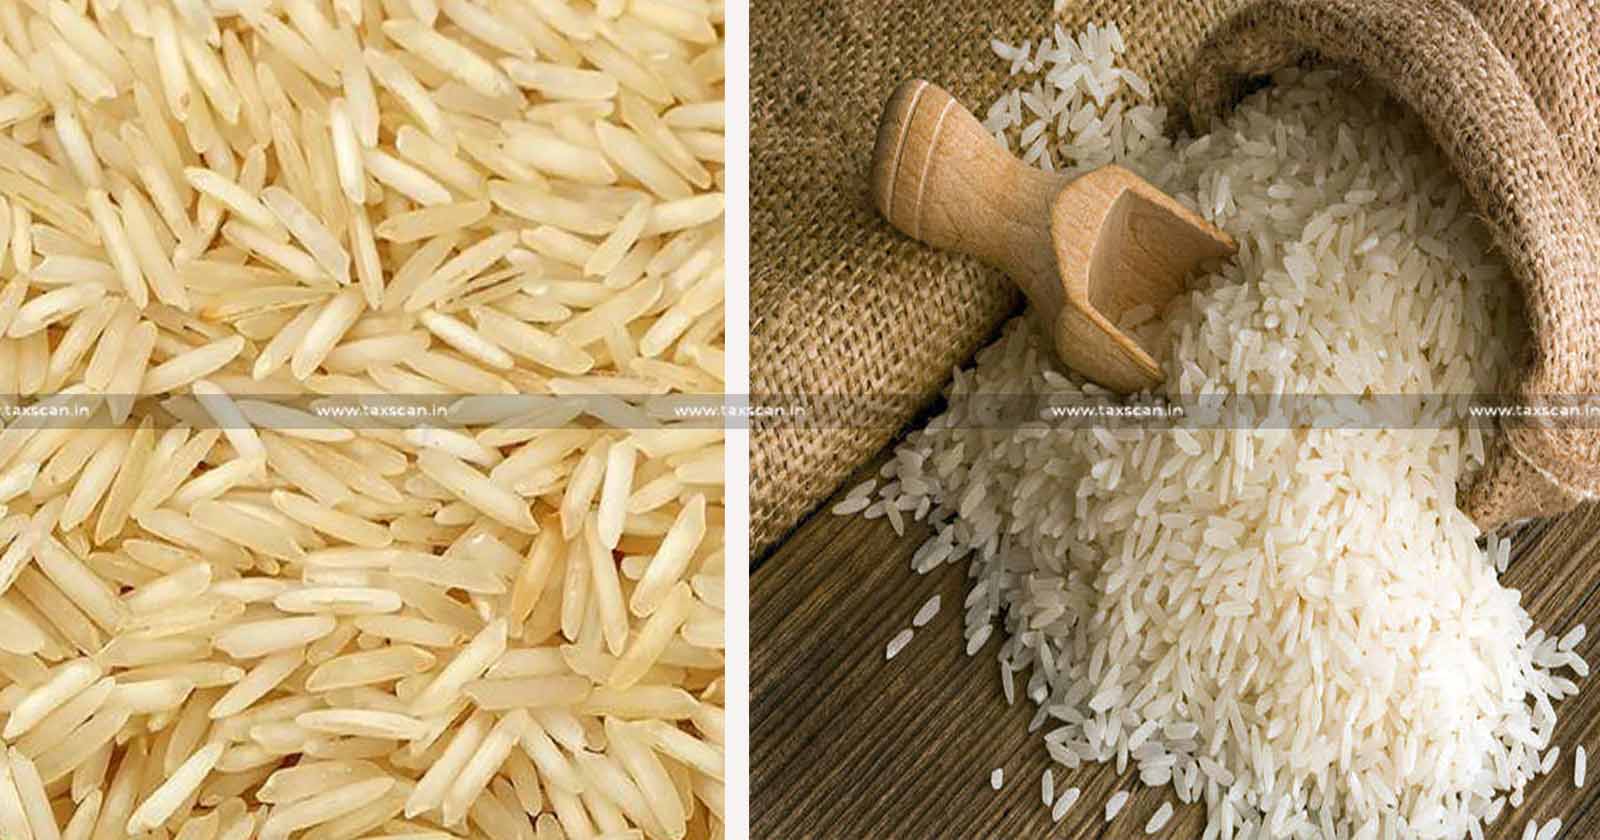 DGFT - Export Policy Conditions of Non-Basmati - DGFT Amends Export Policy Conditions - Basmati Rice -Export Policy Conditions -DGFT Amends Export Policy Conditions - taxscan